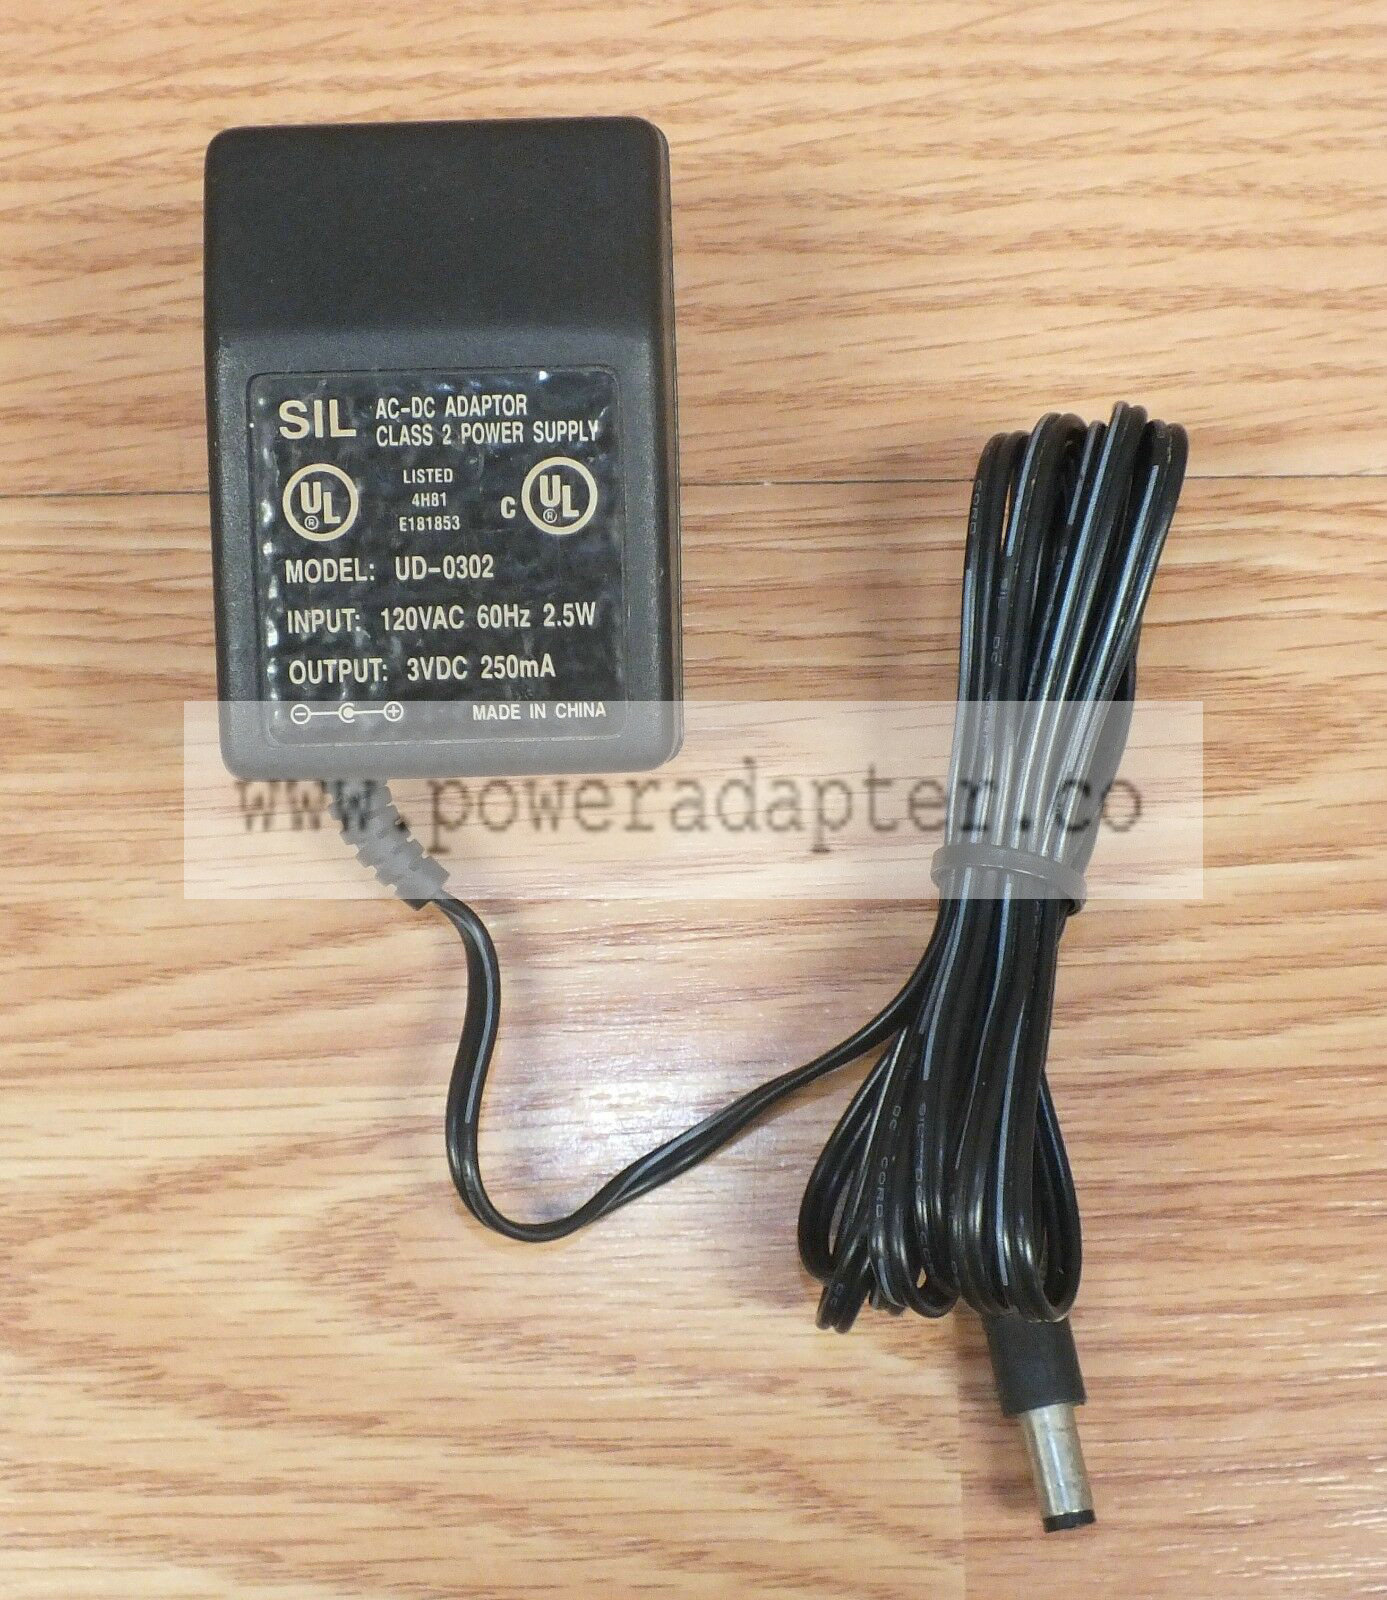 Genuine SIL (UD-0302) 3VDC 250mA Class 2 Power Supply / AC Adapter Only **READ** Country/Region of Manufacture: Chin